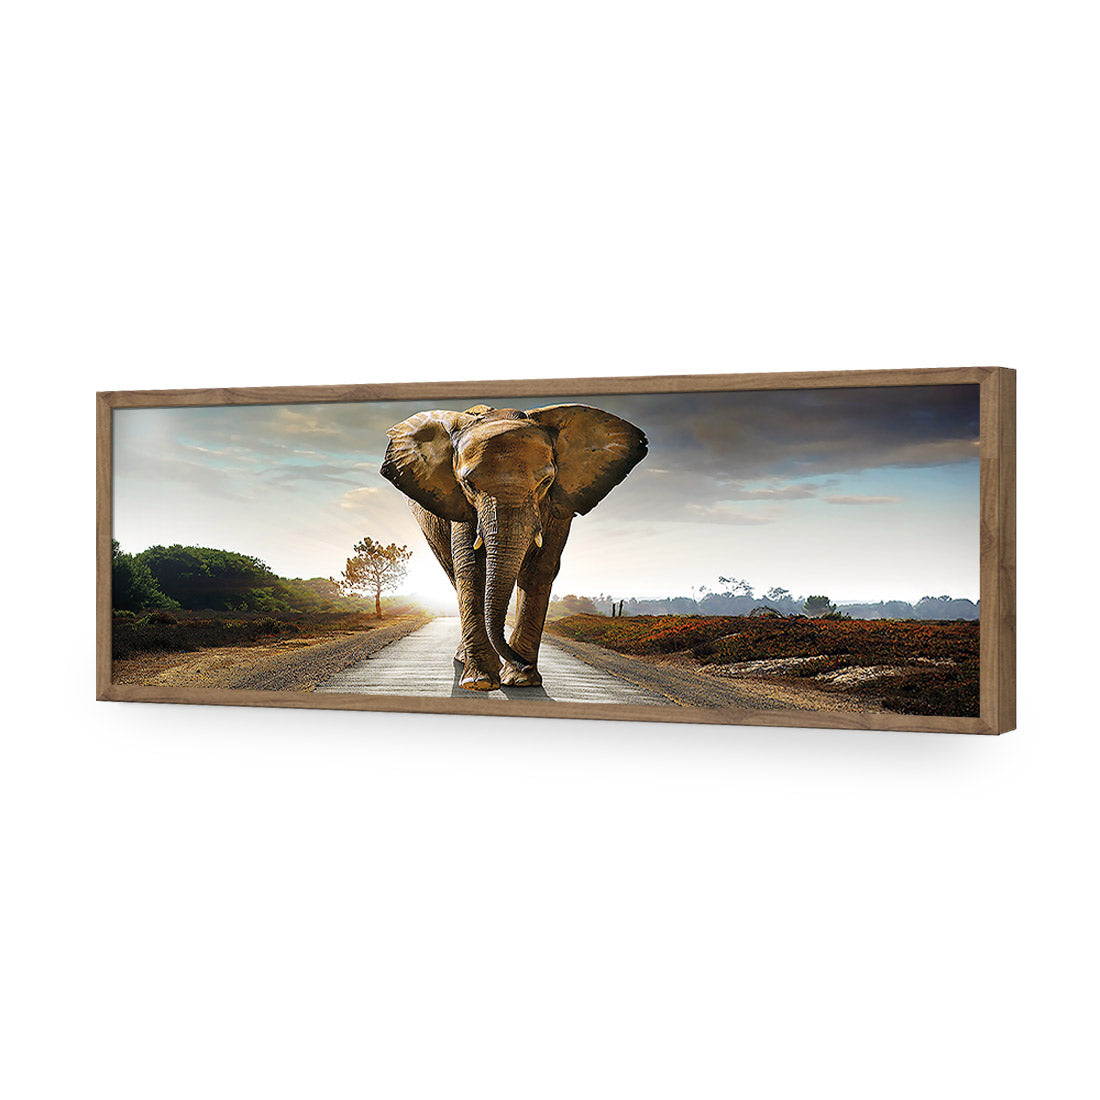 Determined Elephant, Long Acrylic Glass Art-Acrylic-Wall Art Design-Without Border-Acrylic - Natural Frame-60x20cm-Wall Art Designs